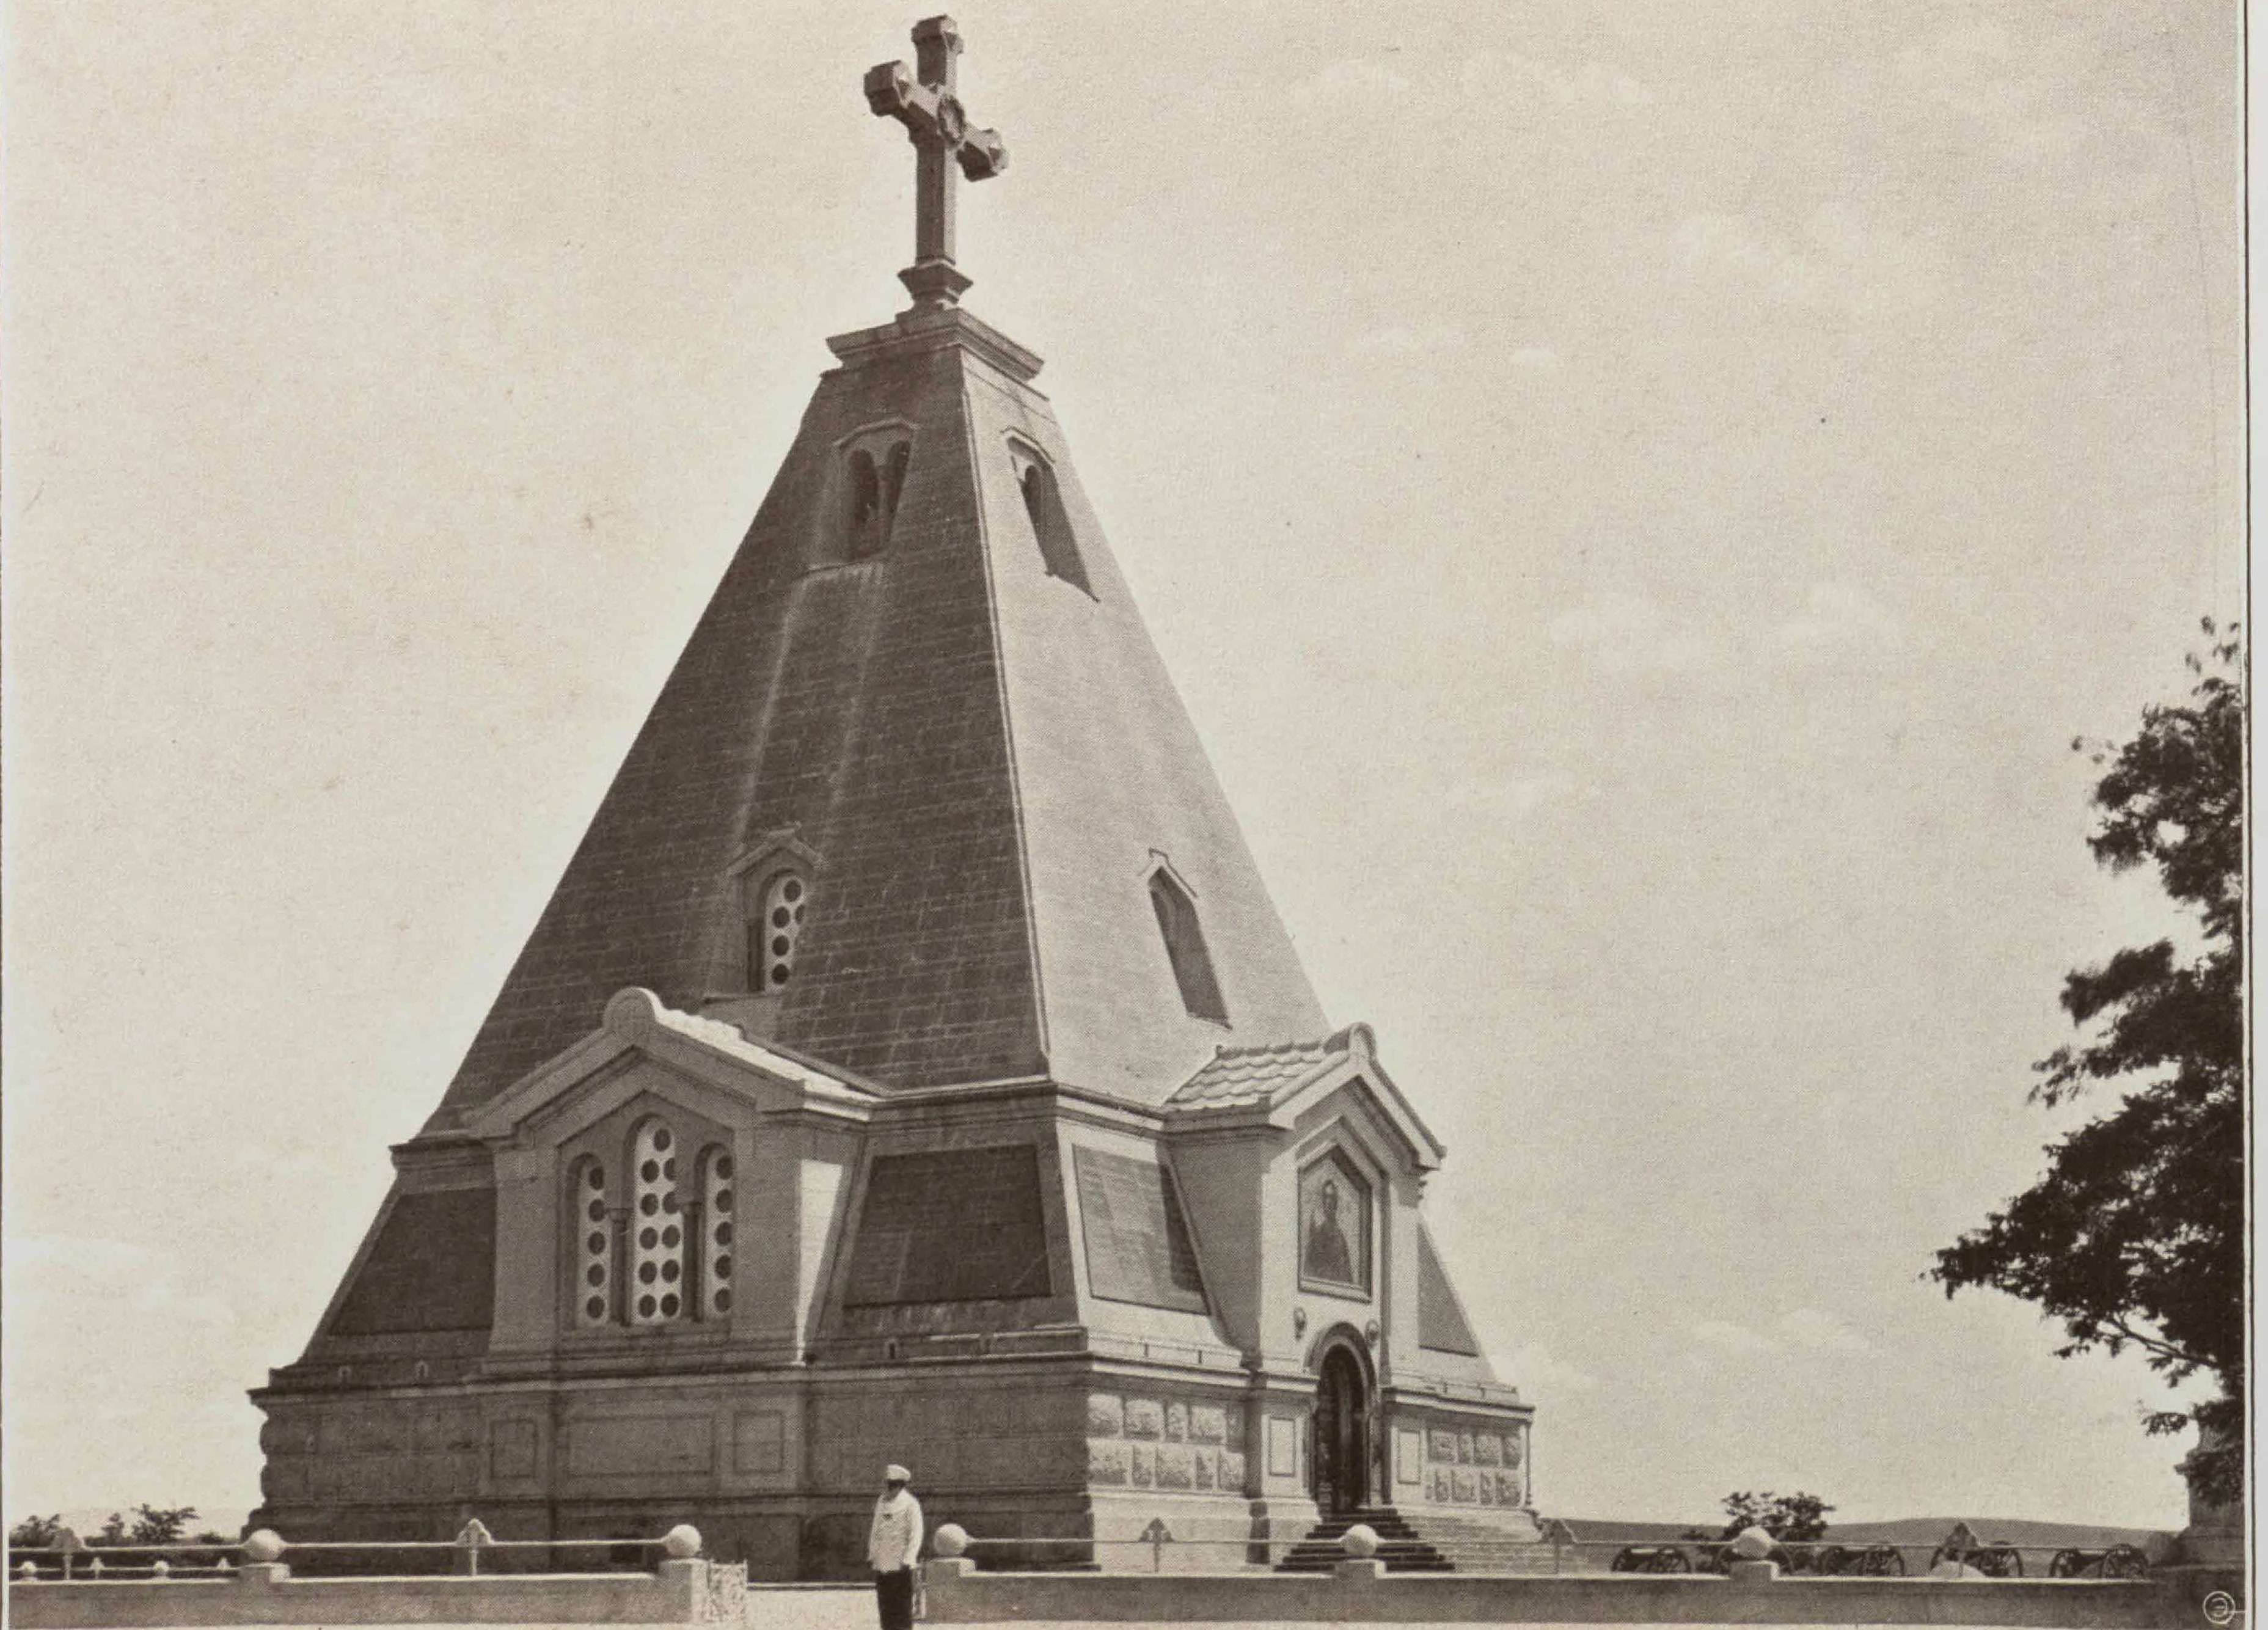 Bratsky Cemetery church. Photographs by Colonel Vladislav Klembovsky/Album BATTLEFIELDS OF THE CRIMEAN CAMPAIGN 1854-1855/courtesy of the State Historic Public Library of Russia